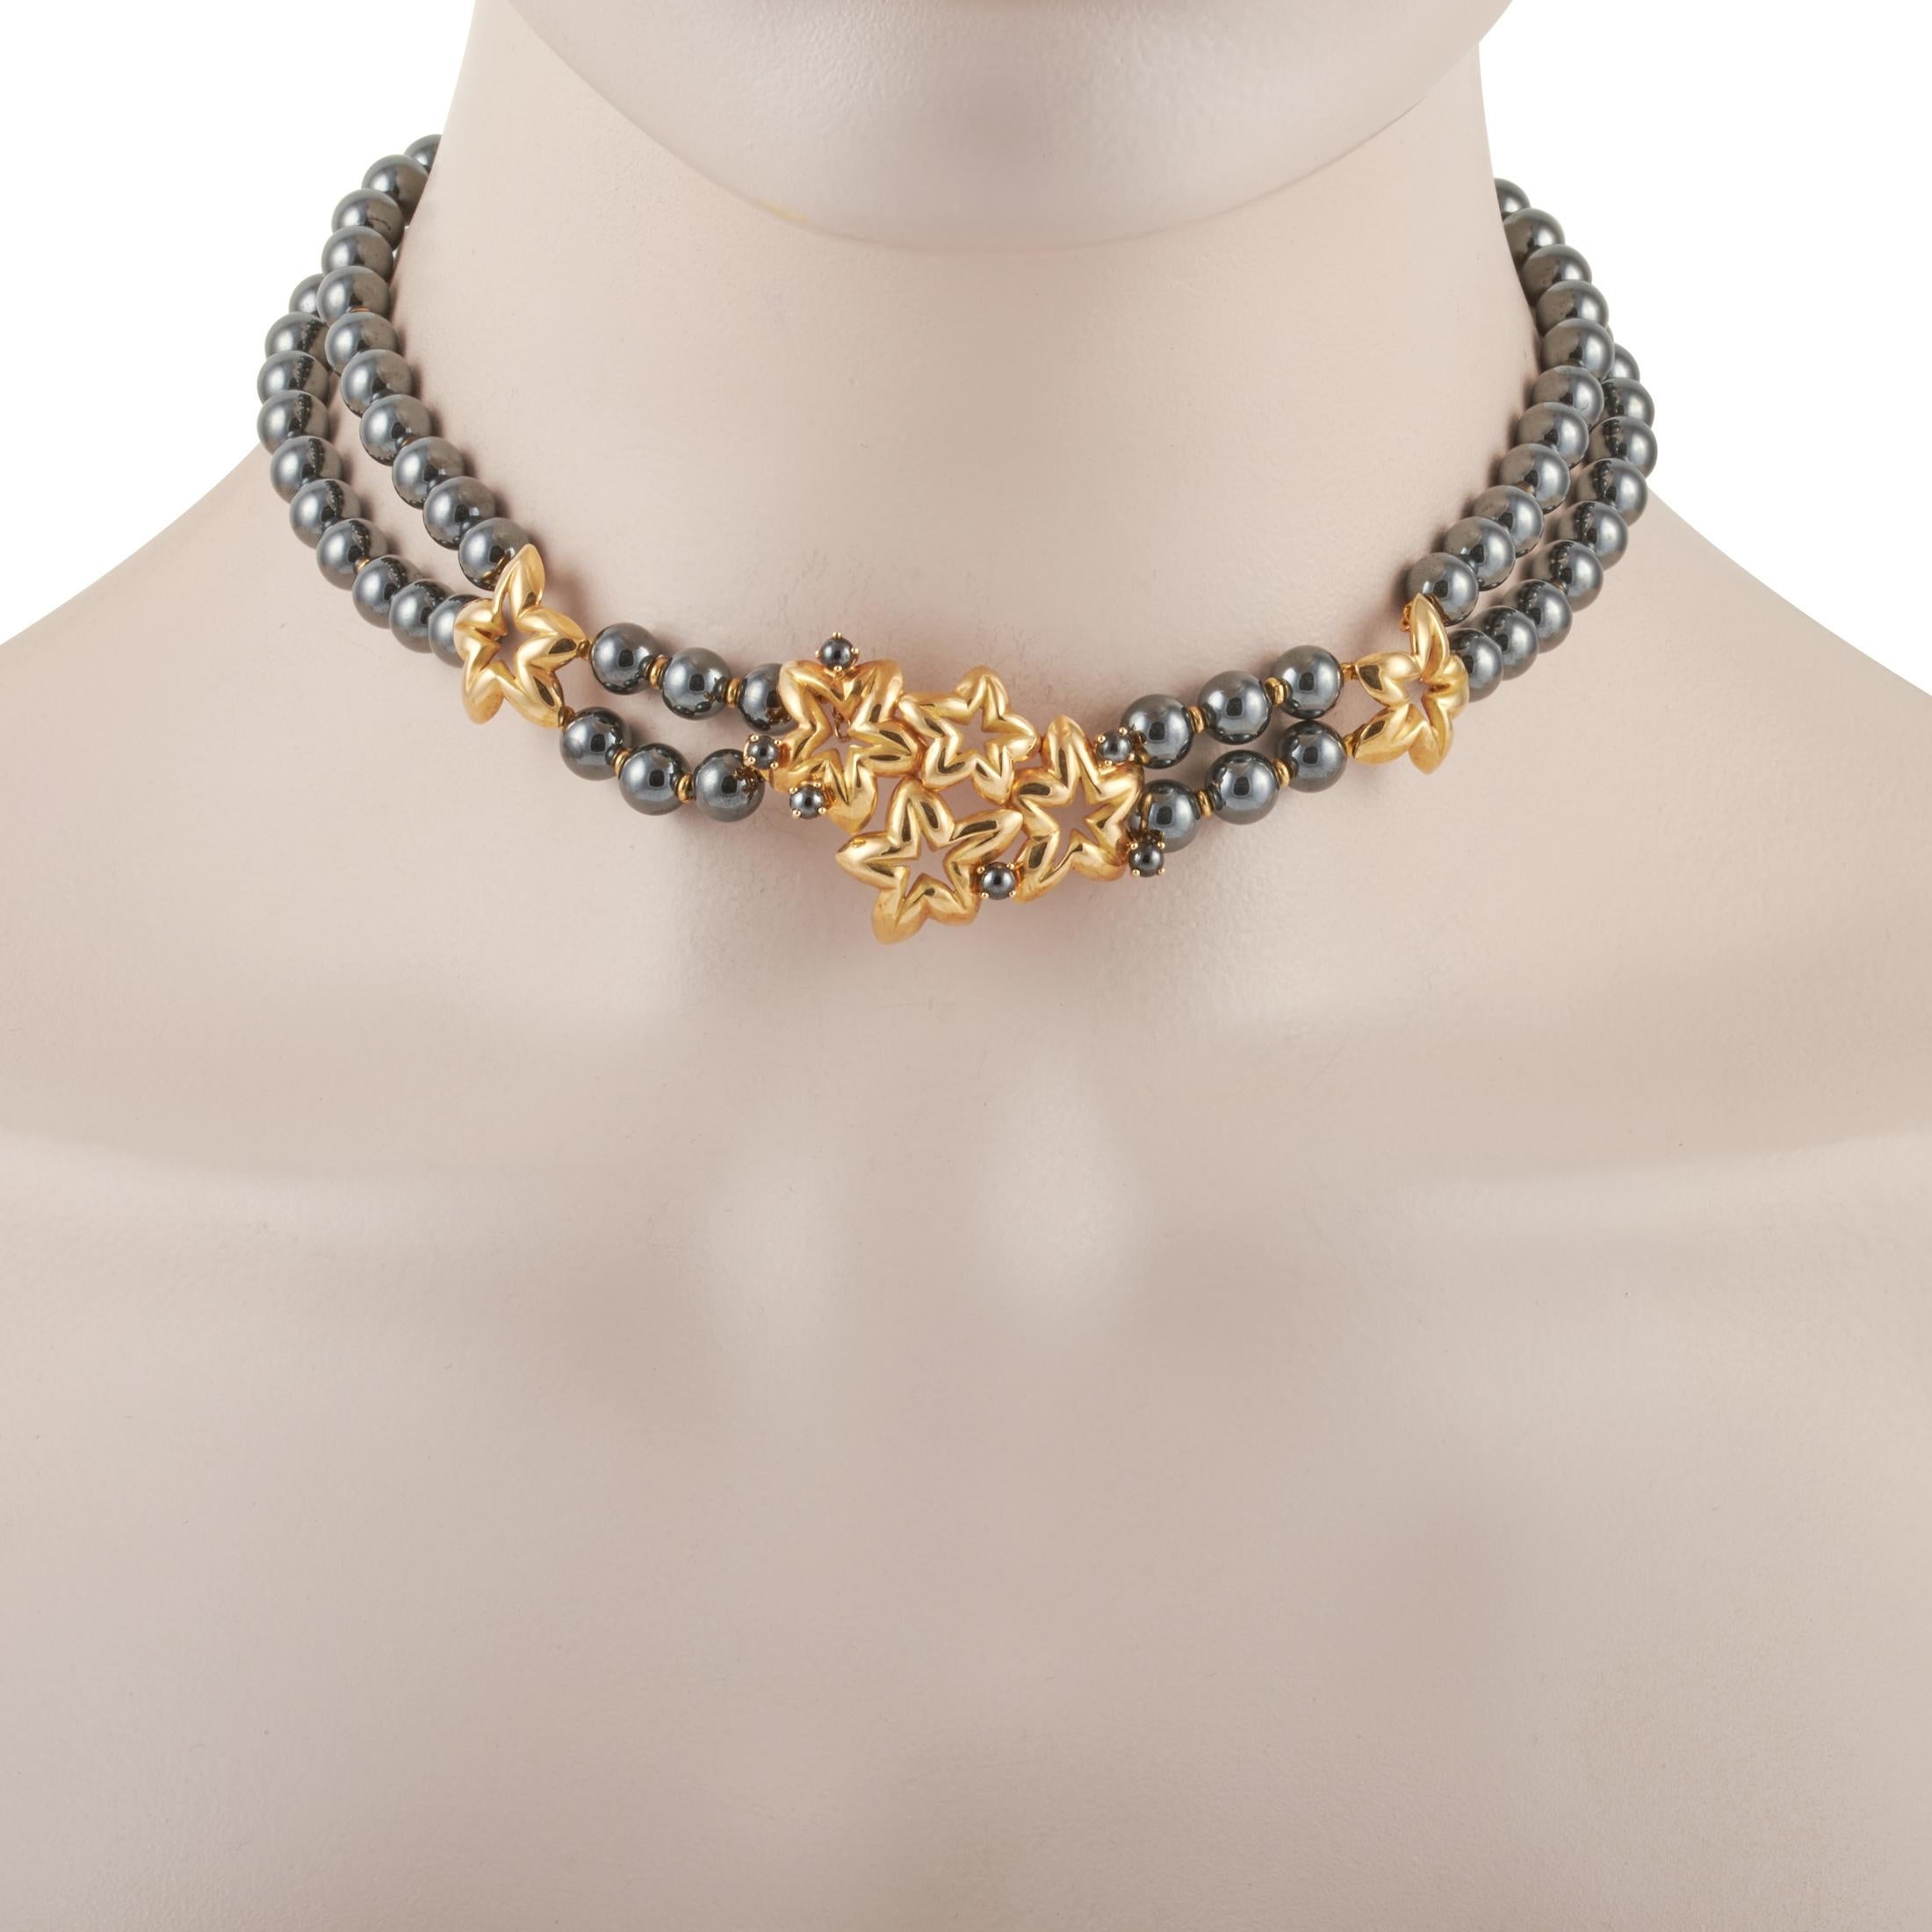 Bold and dramatic, this statement necklace from Chaumet combines the dark and intriguing look of hematite with the striking shine of 18K yellow gold. This jewel features a collar necklace made of hematite beads interspersed with sculpted golden